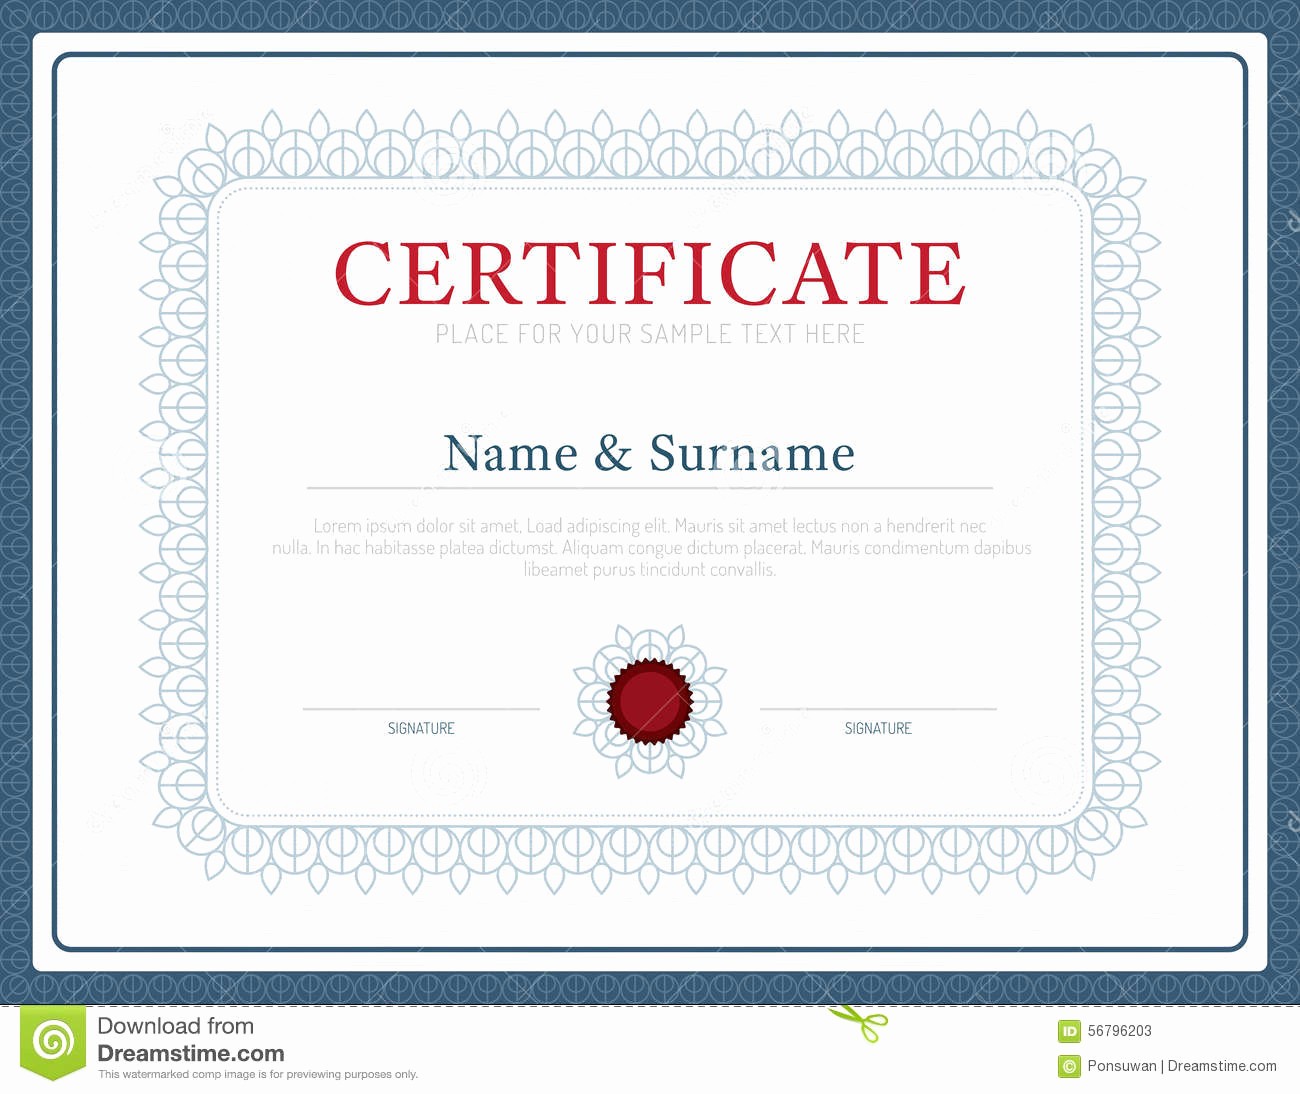 How to Design A Certificate New Certificate Template Layout Background Frame Design Vector